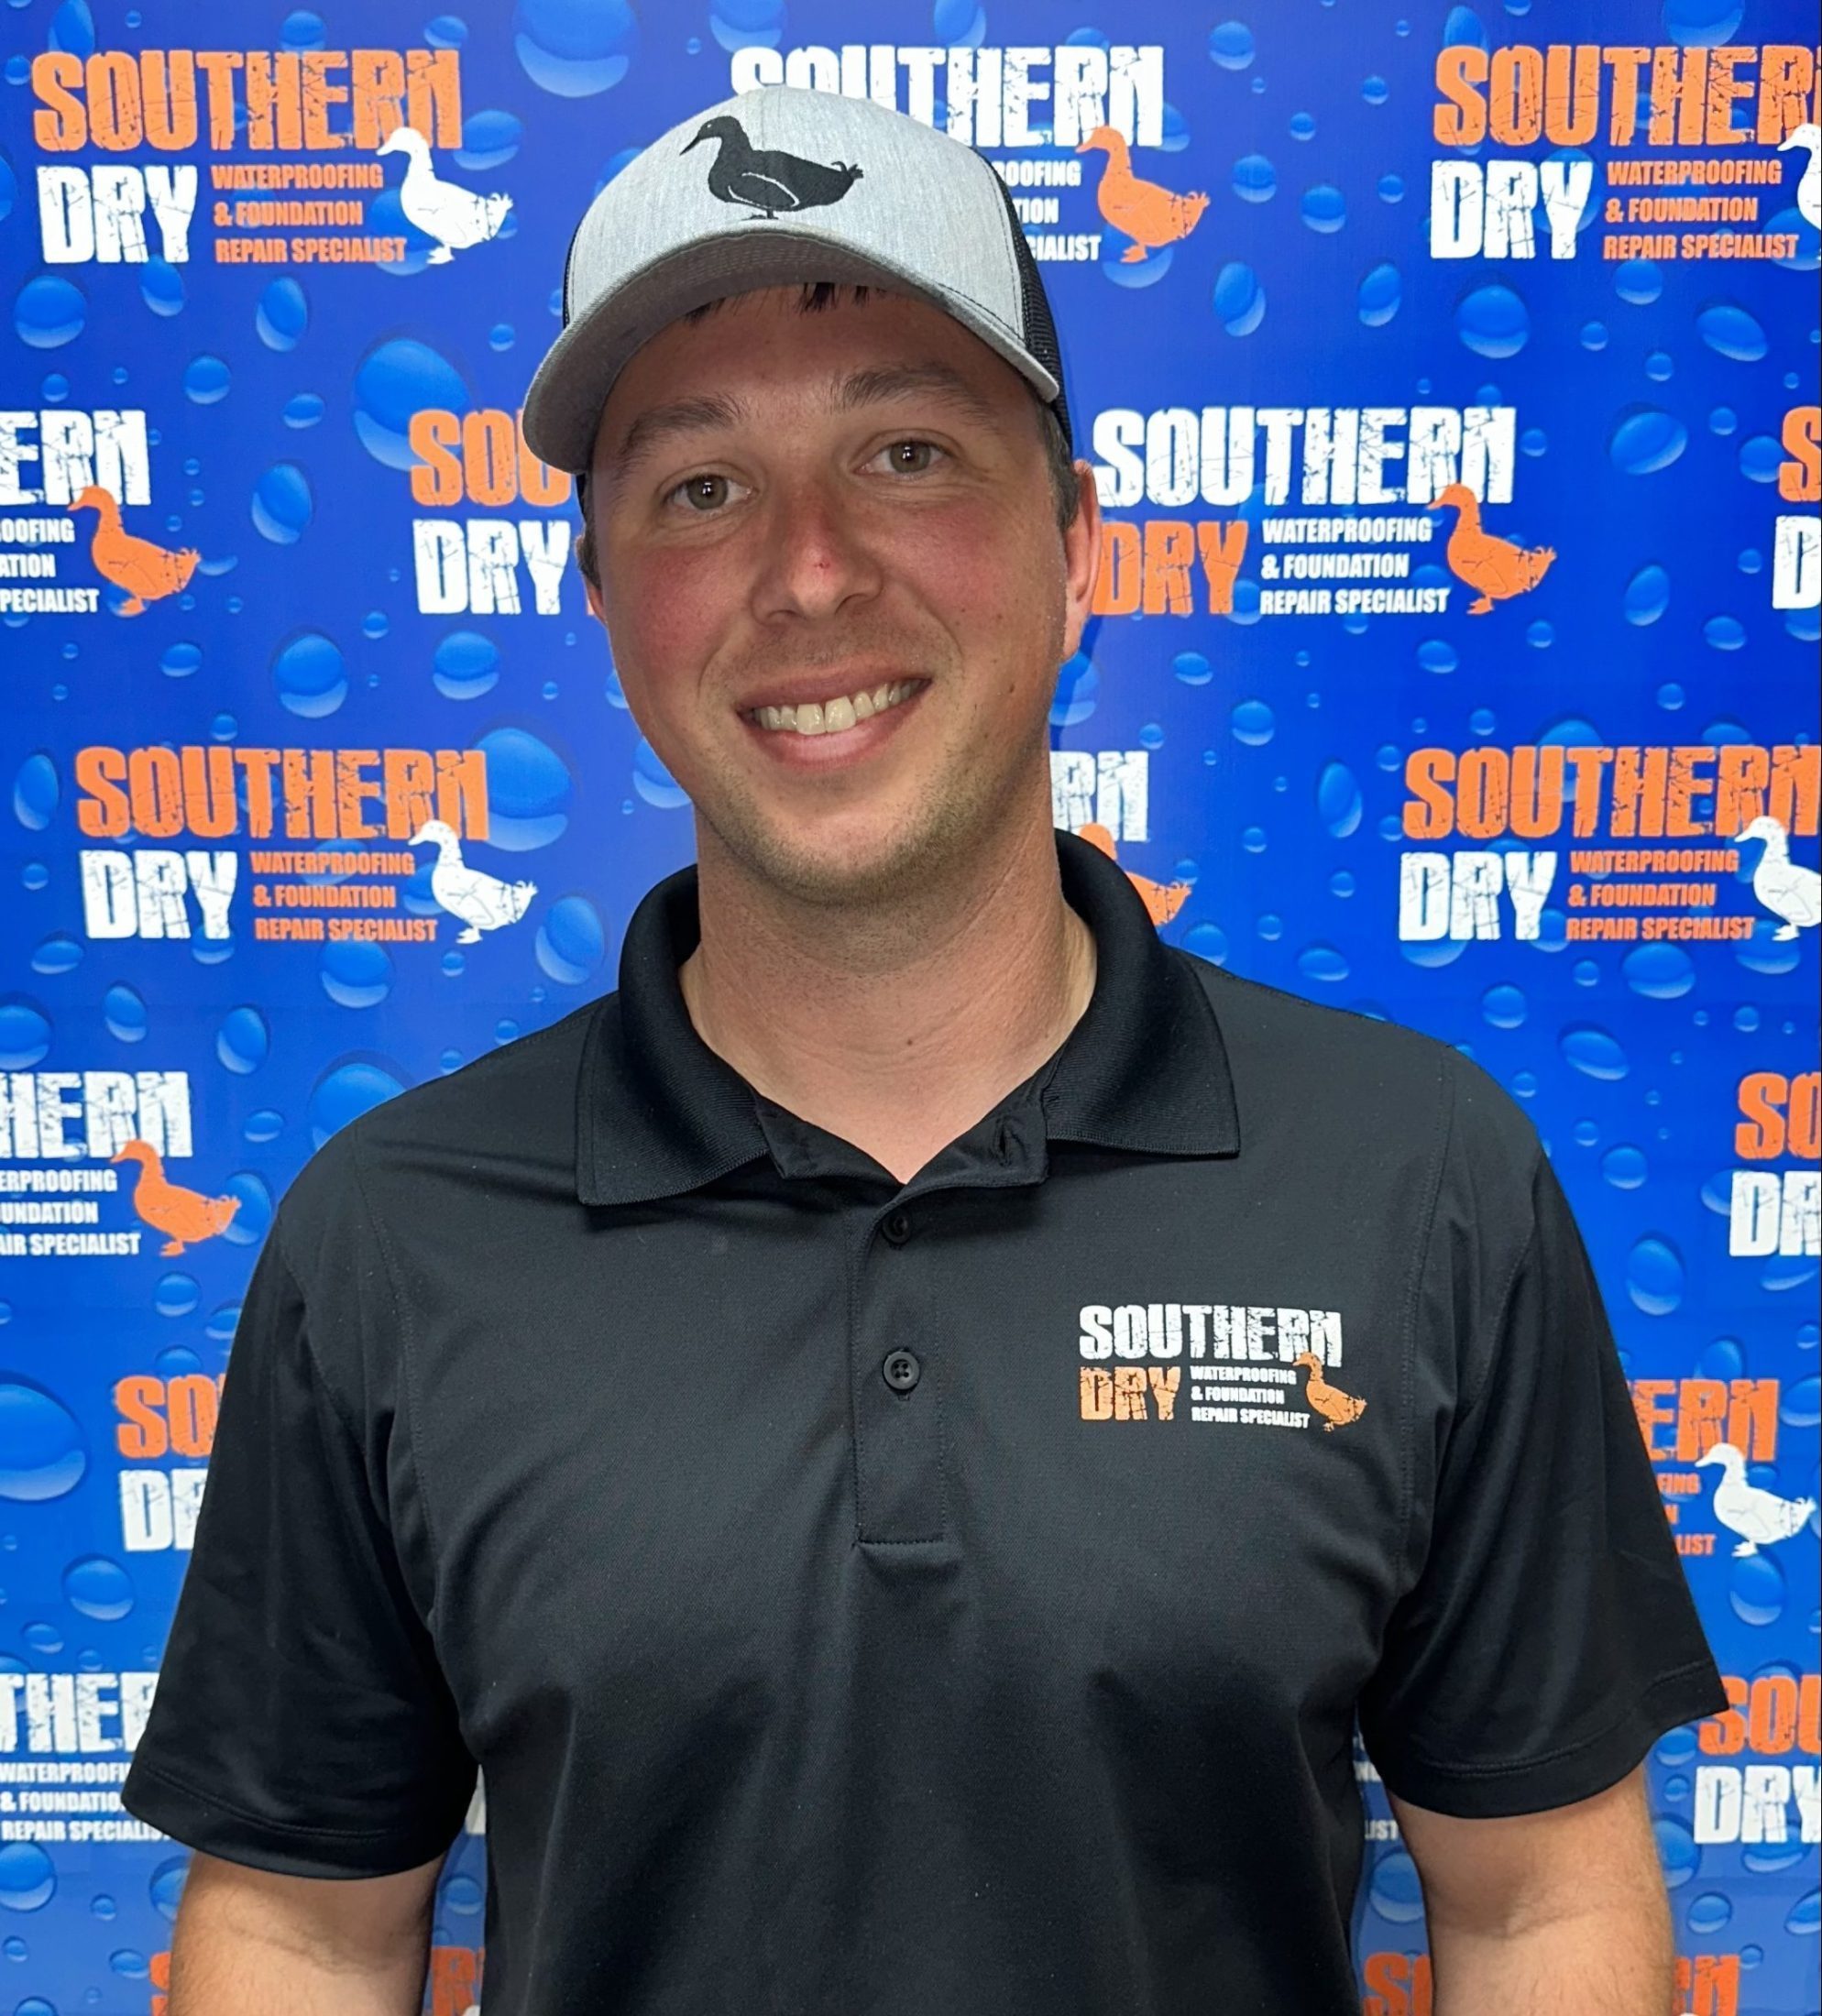 southerndry foundation repair expert - trent franklin